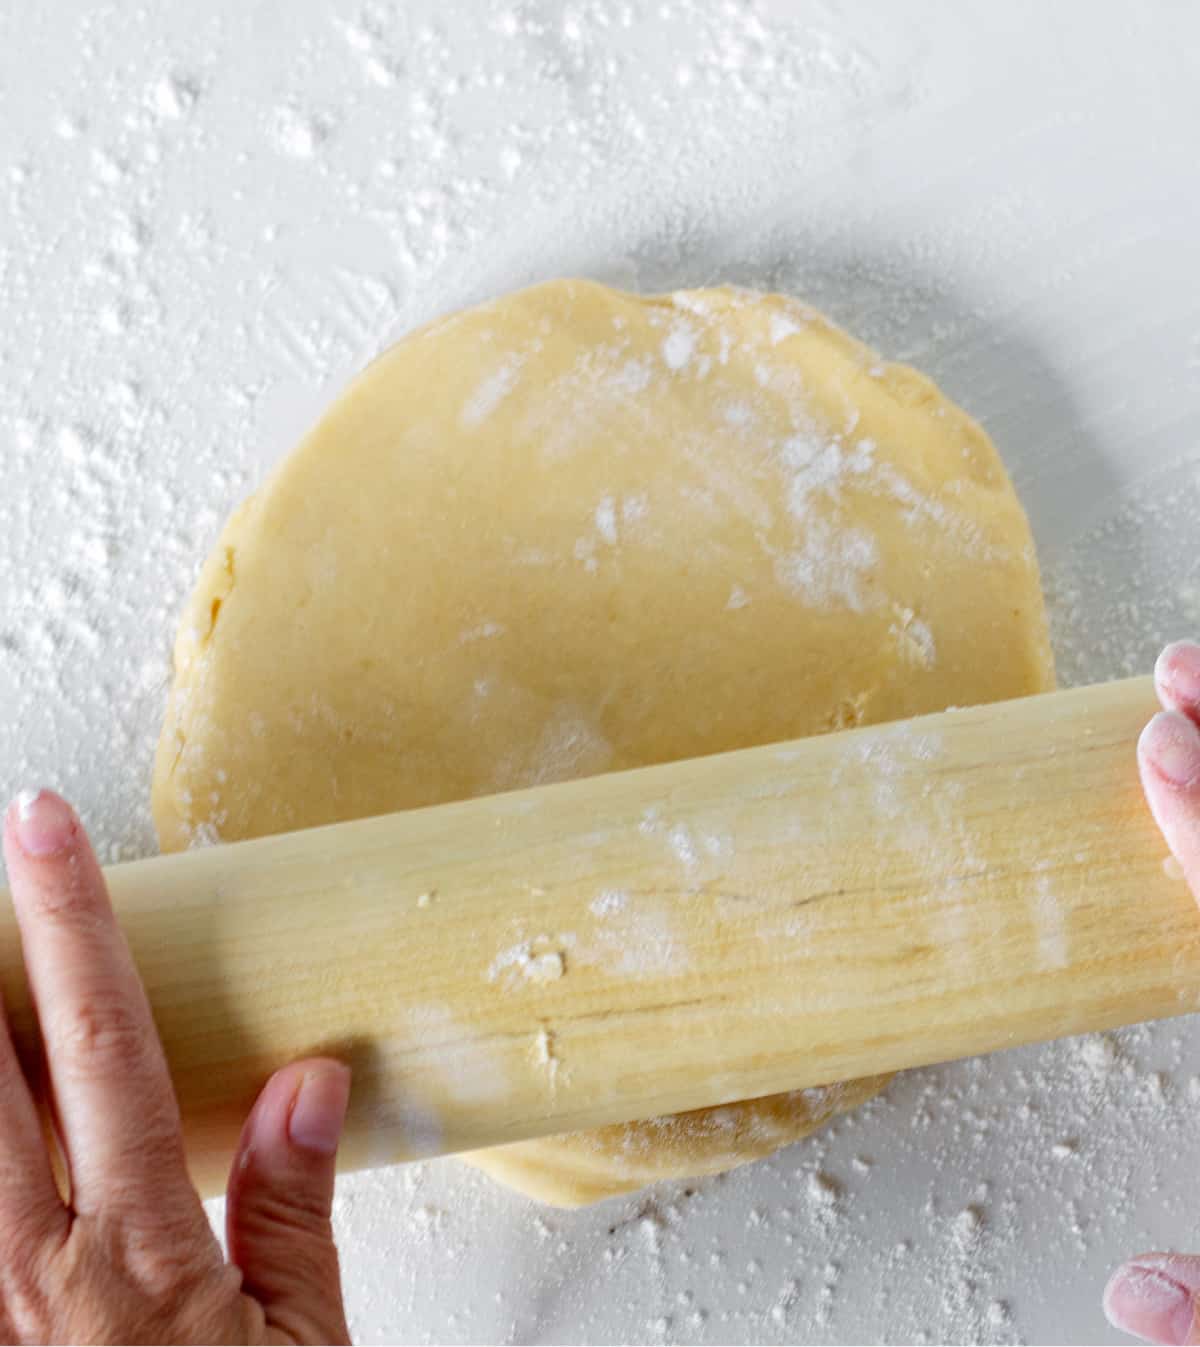 Hands rolling disc of dough with pin on white surface